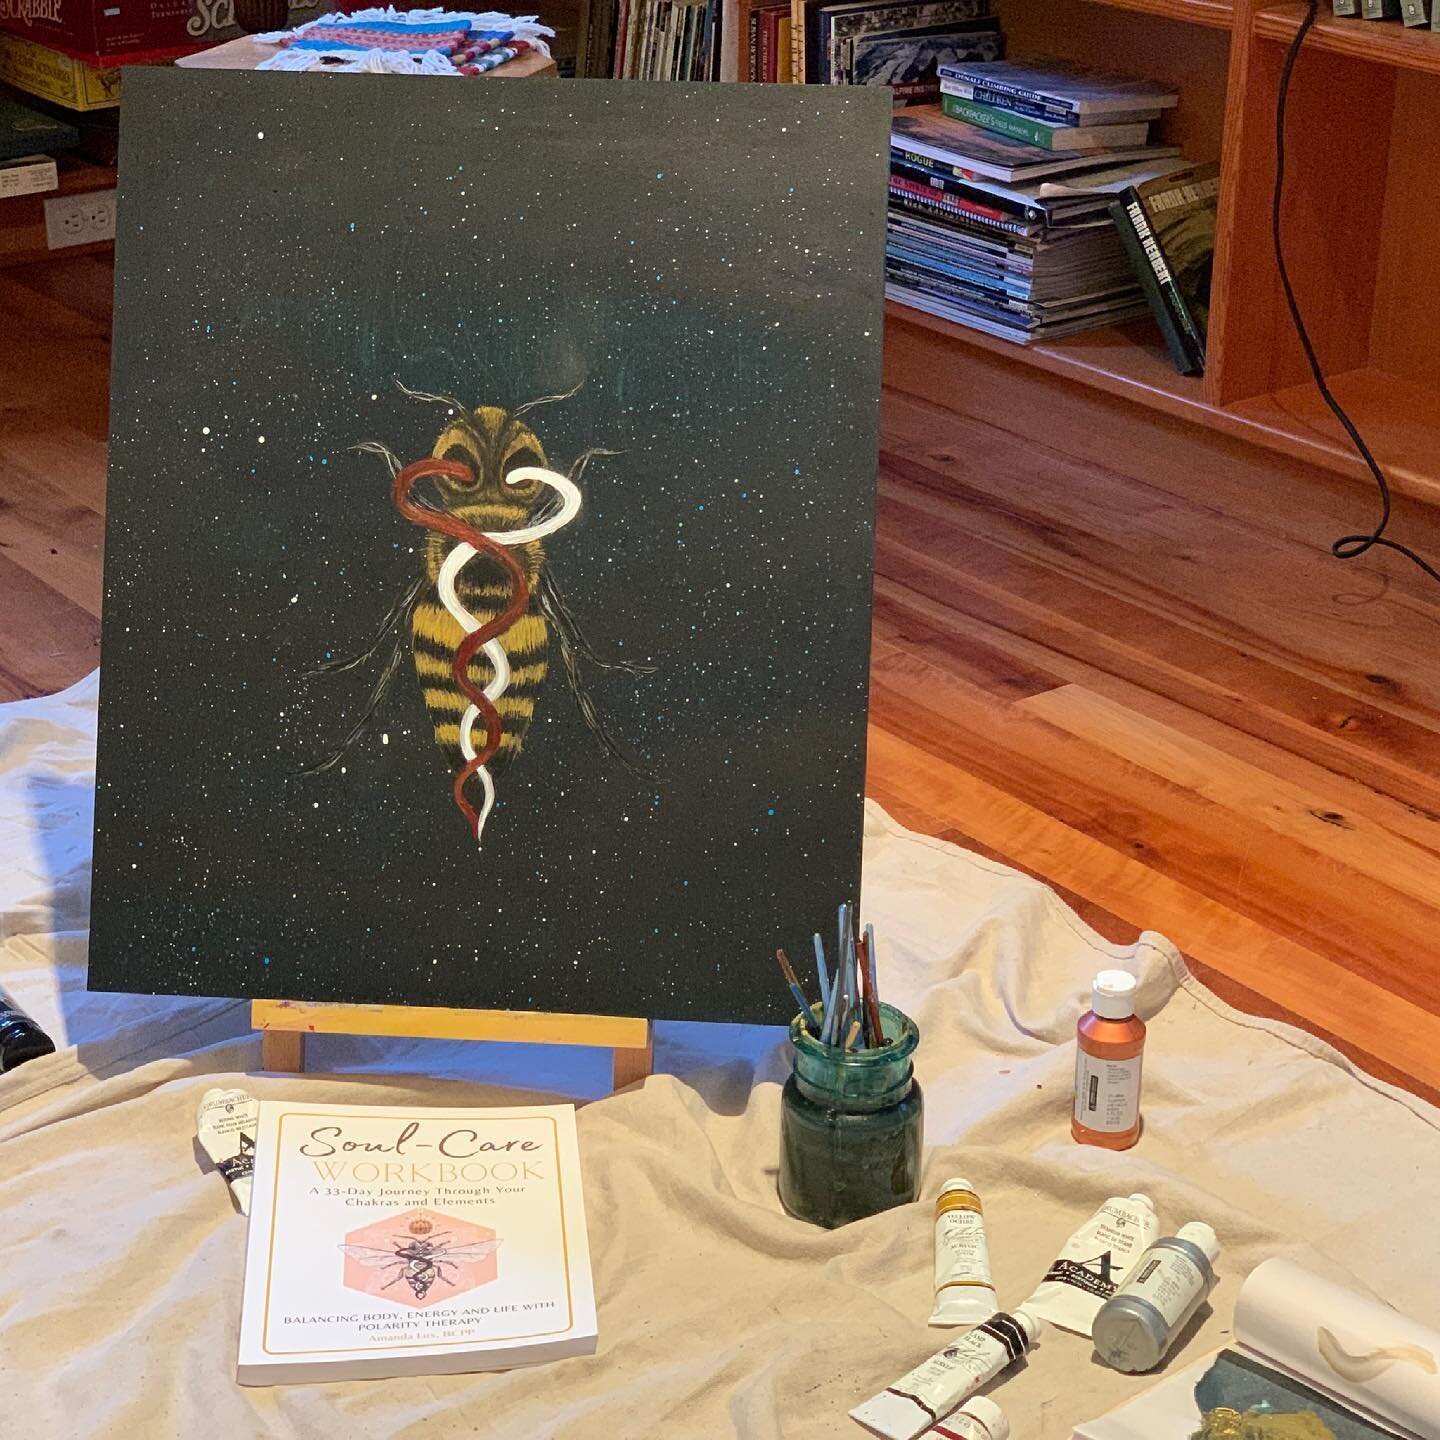 Work in progress...

This piece is a symbol of my highest alignment in my power and purpose. The practice of this painting is in the listening, integrating, embodying emerging. 

Remembering. Dissolving. Embodying. Surrendering. Being guided.